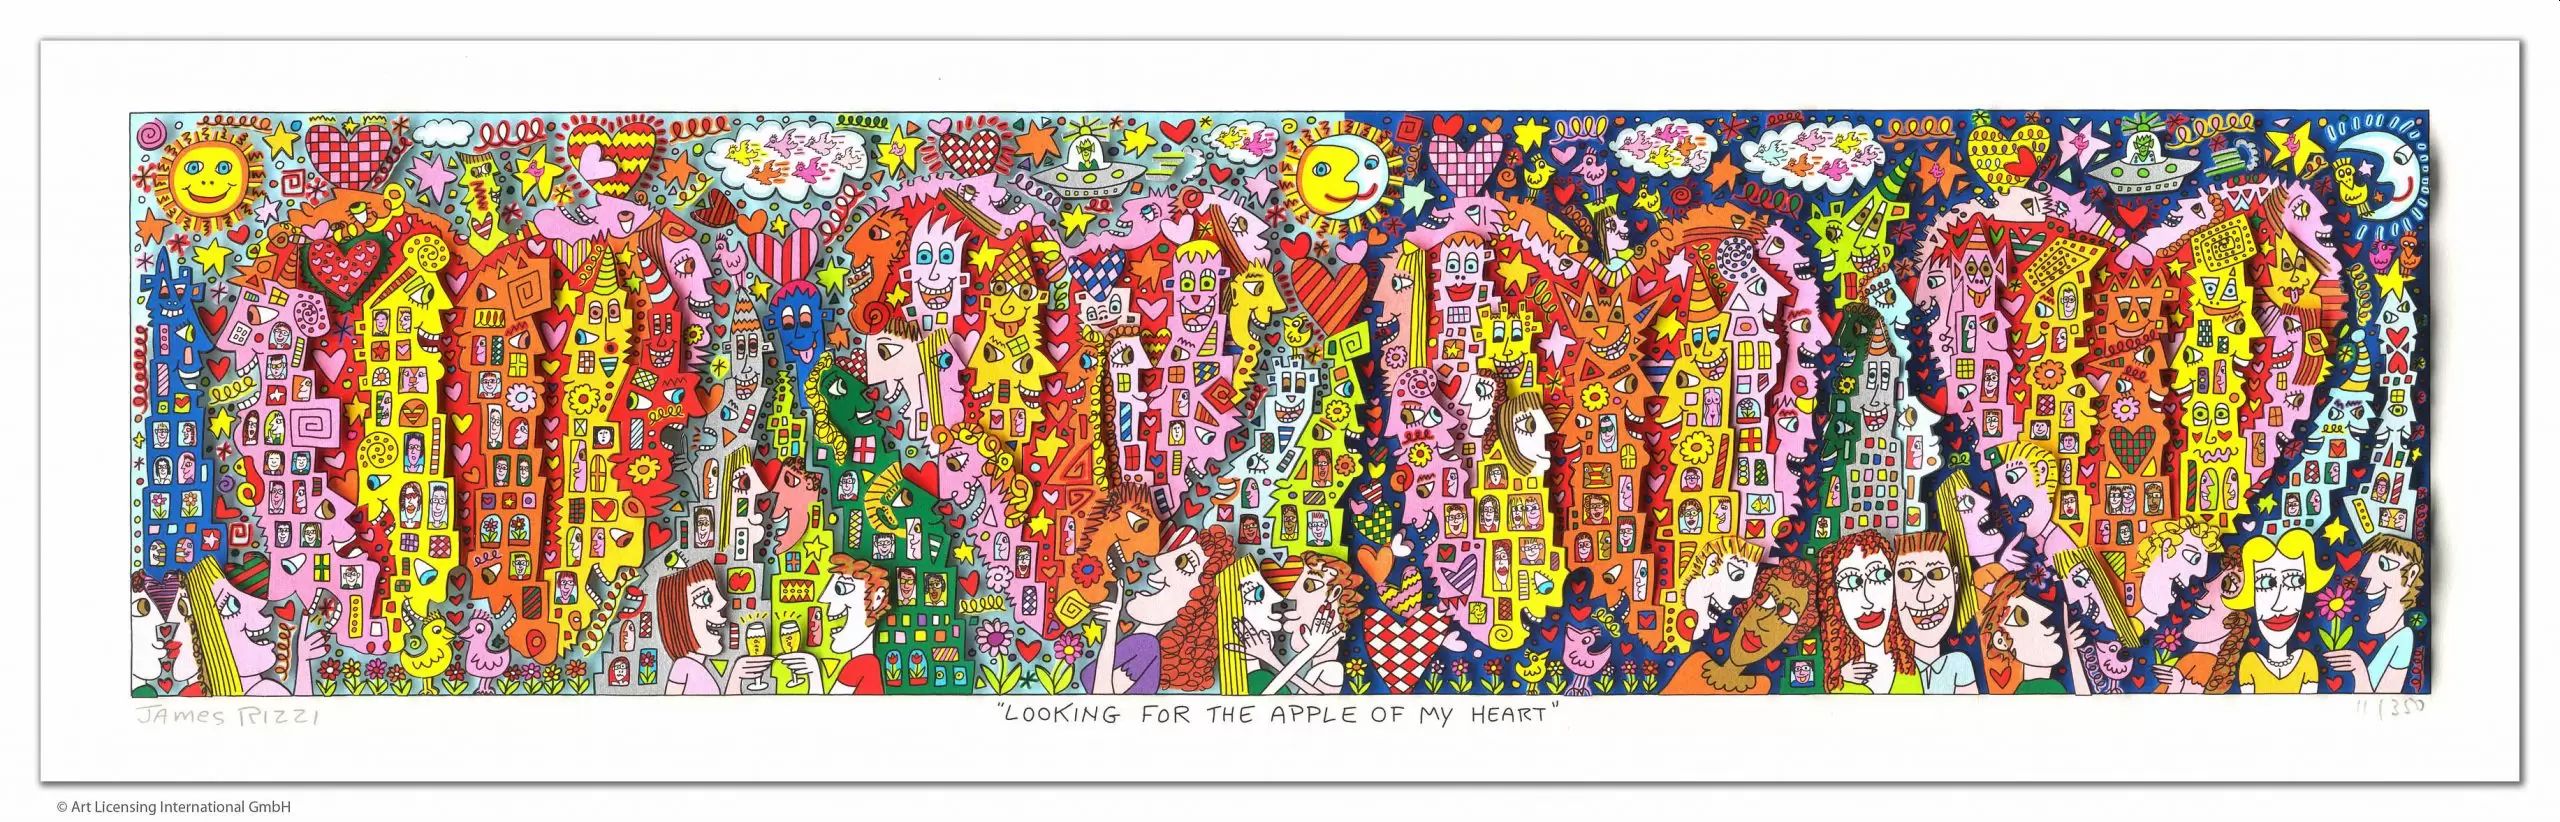 James Rizzi - LOOKING FOR THE APPLE OF MY HEART 